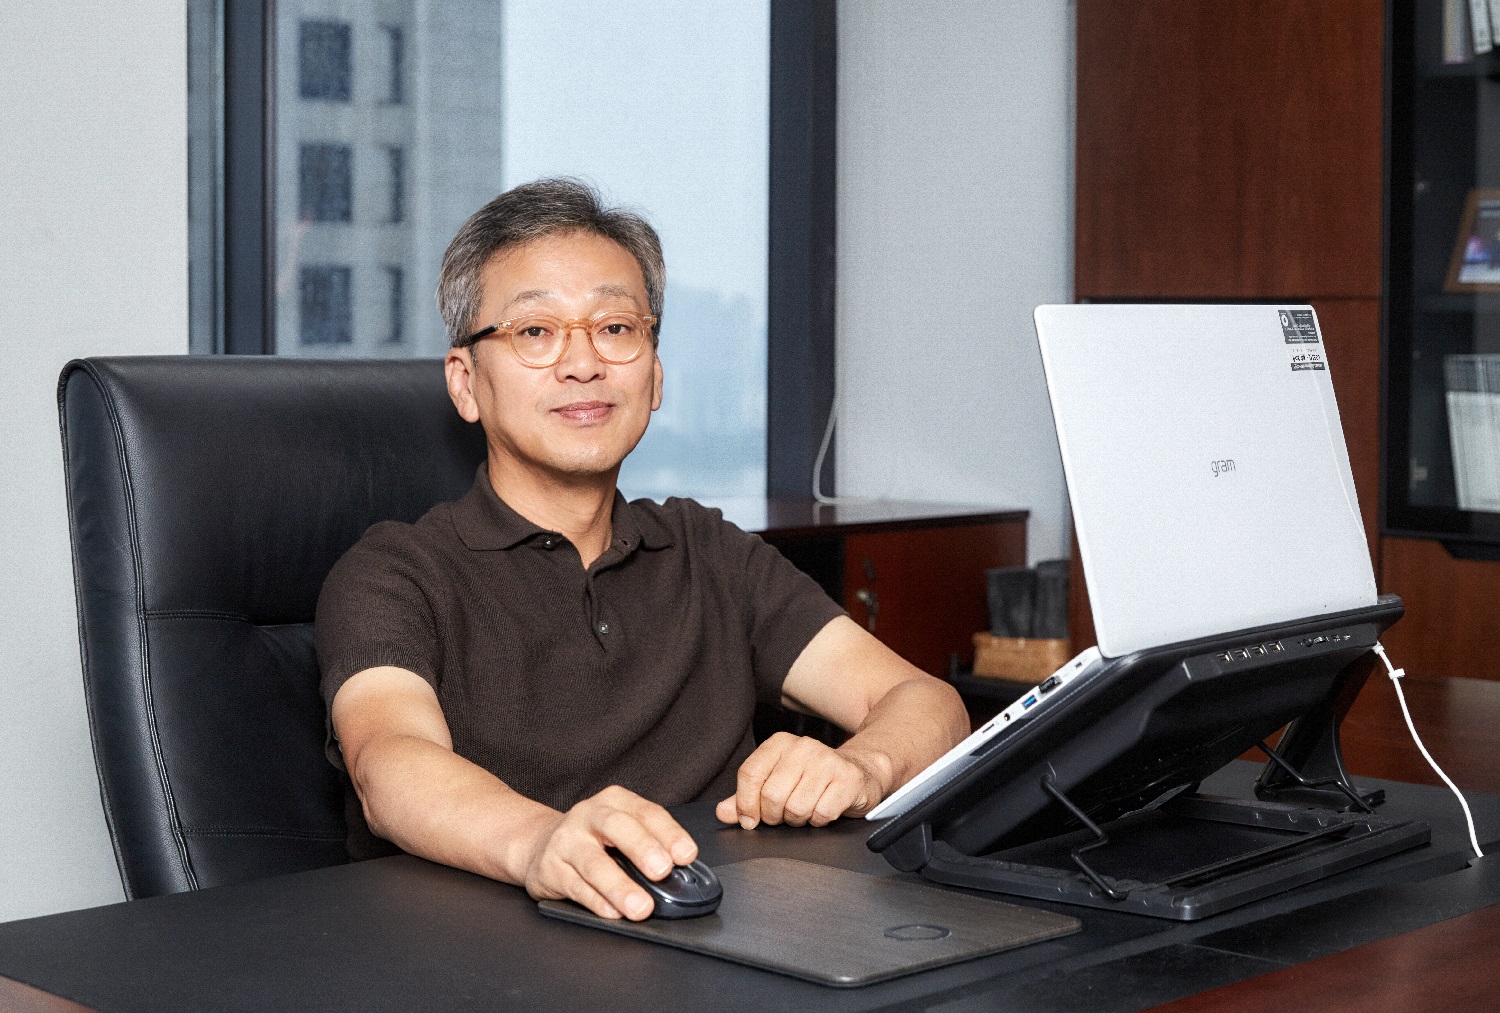 Lee Sam-soo, Chief Digital Officer at LG Electronics, posing at his office with LG gram